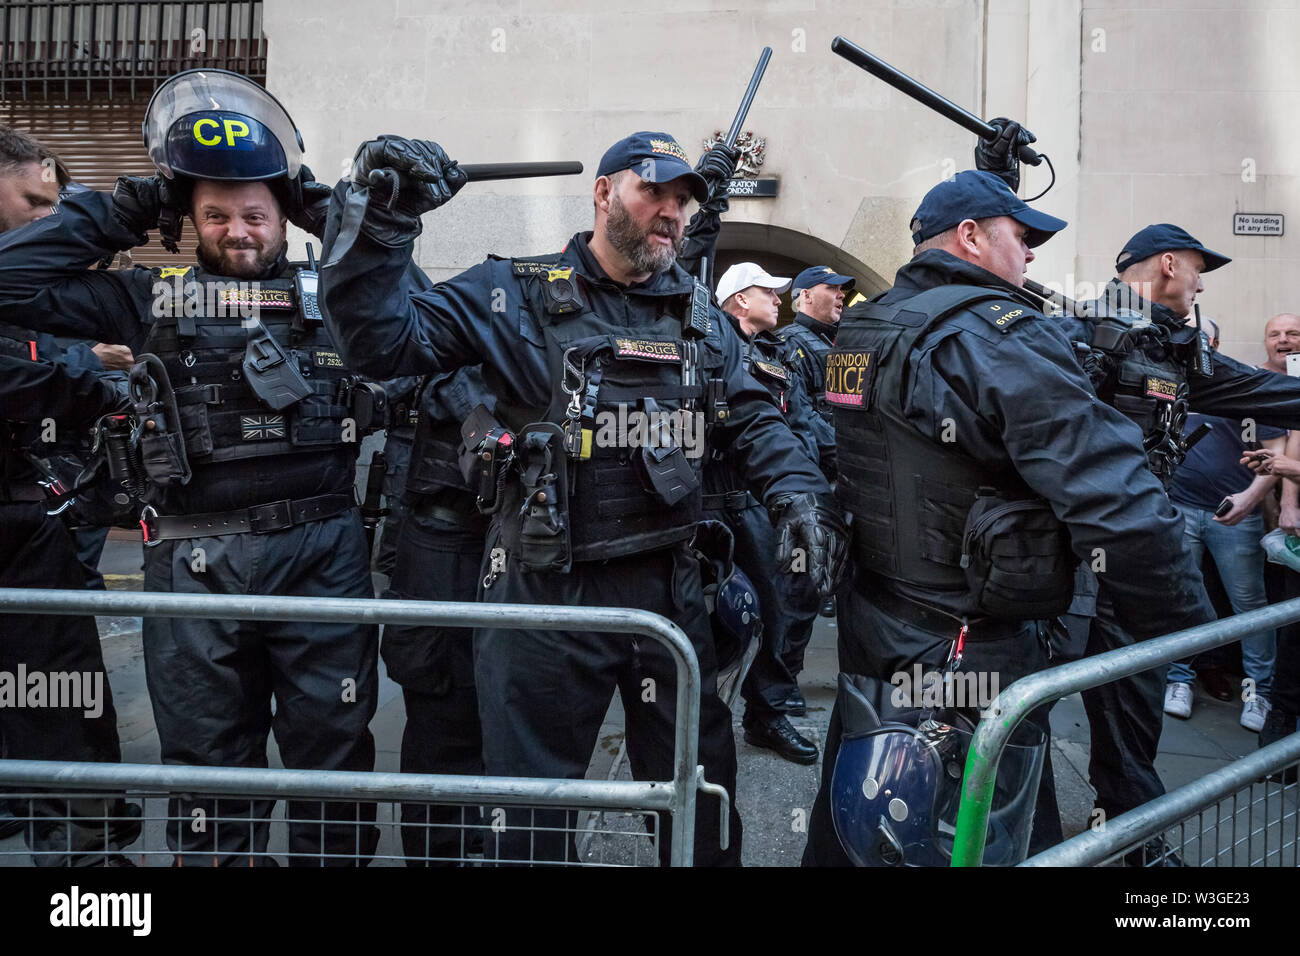 London, UK. 11th July 2019. Angry scenes of civil unrest outside Old Bailey court between riot police and supporters of Tommy Robinson. Sentenced under his real name of Stephen Yaxley-Lennon, a custodial sentence of 19 weeks is ordered after Tommy Robinson was found guilty of contempt of court over the filming outside Leeds Crown Court during a criminal trial last year and broadcasting live on social media. Credit: Guy Corbishley/Alamy Live News Stock Photo